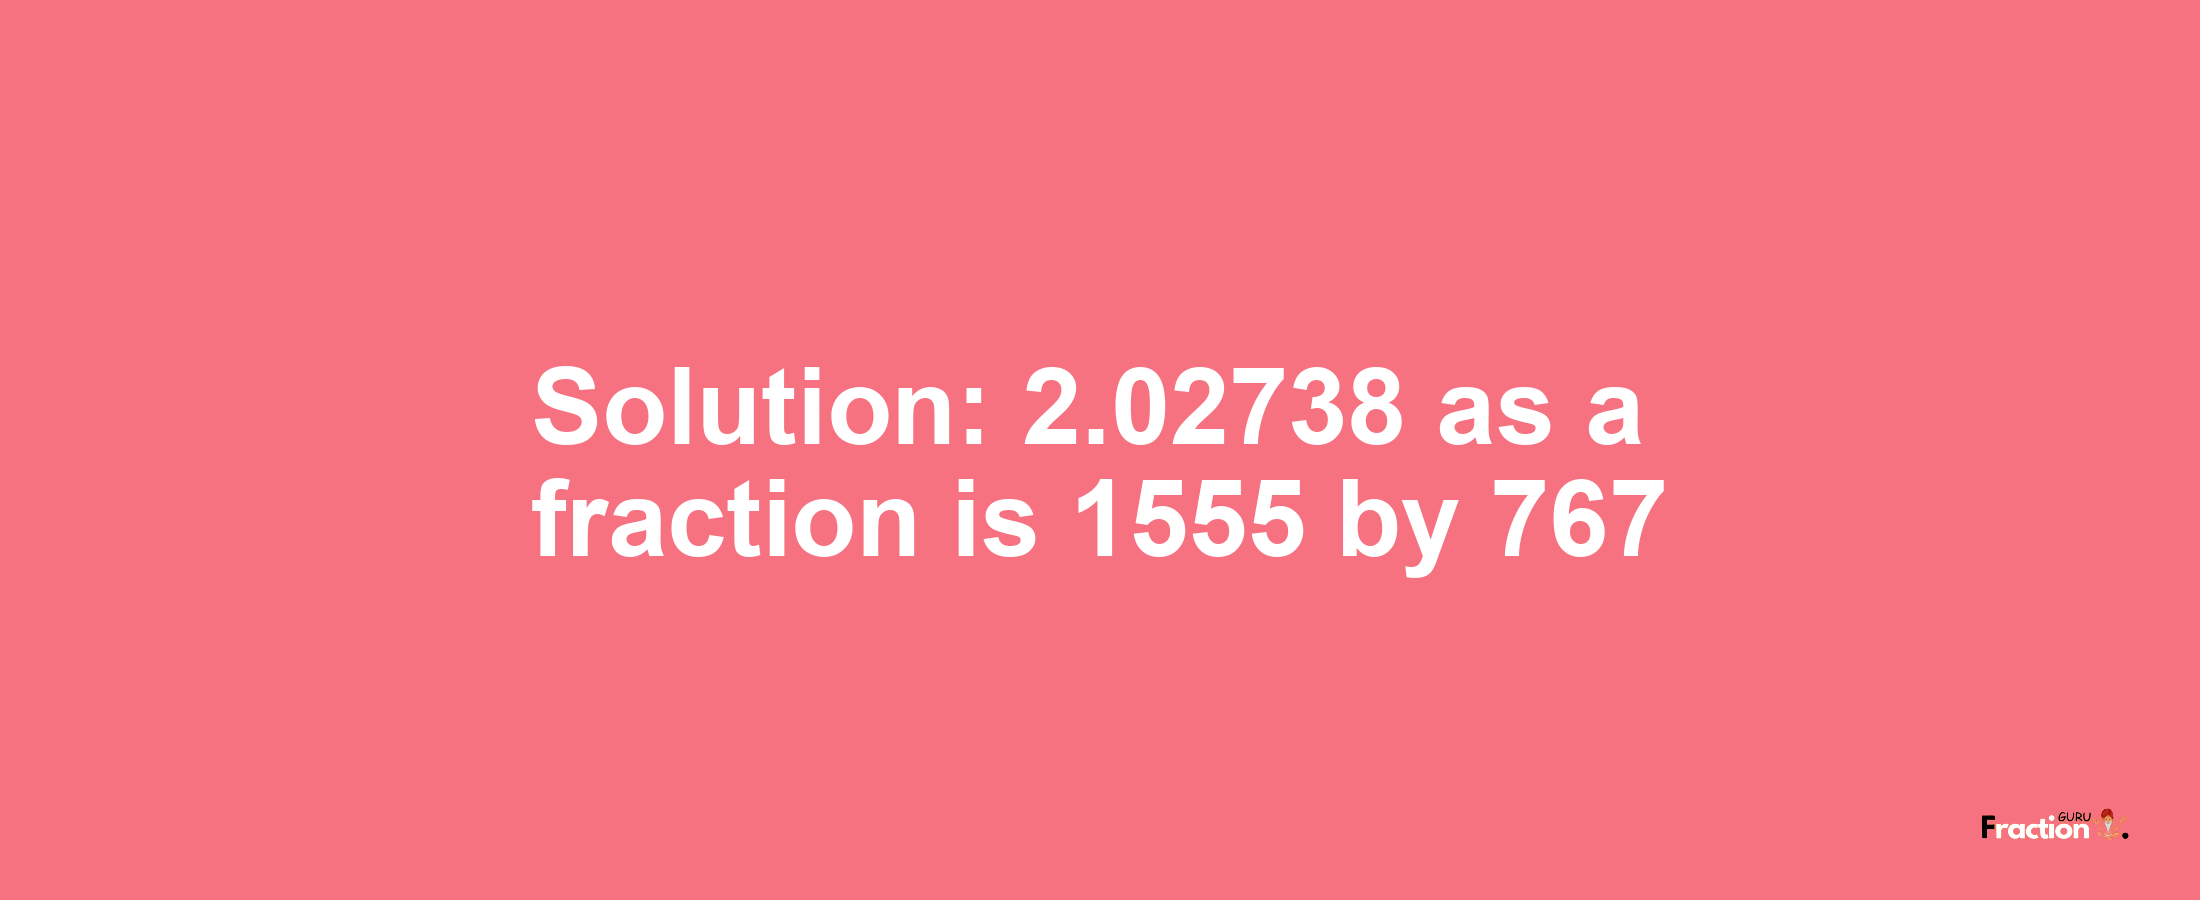 Solution:2.02738 as a fraction is 1555/767